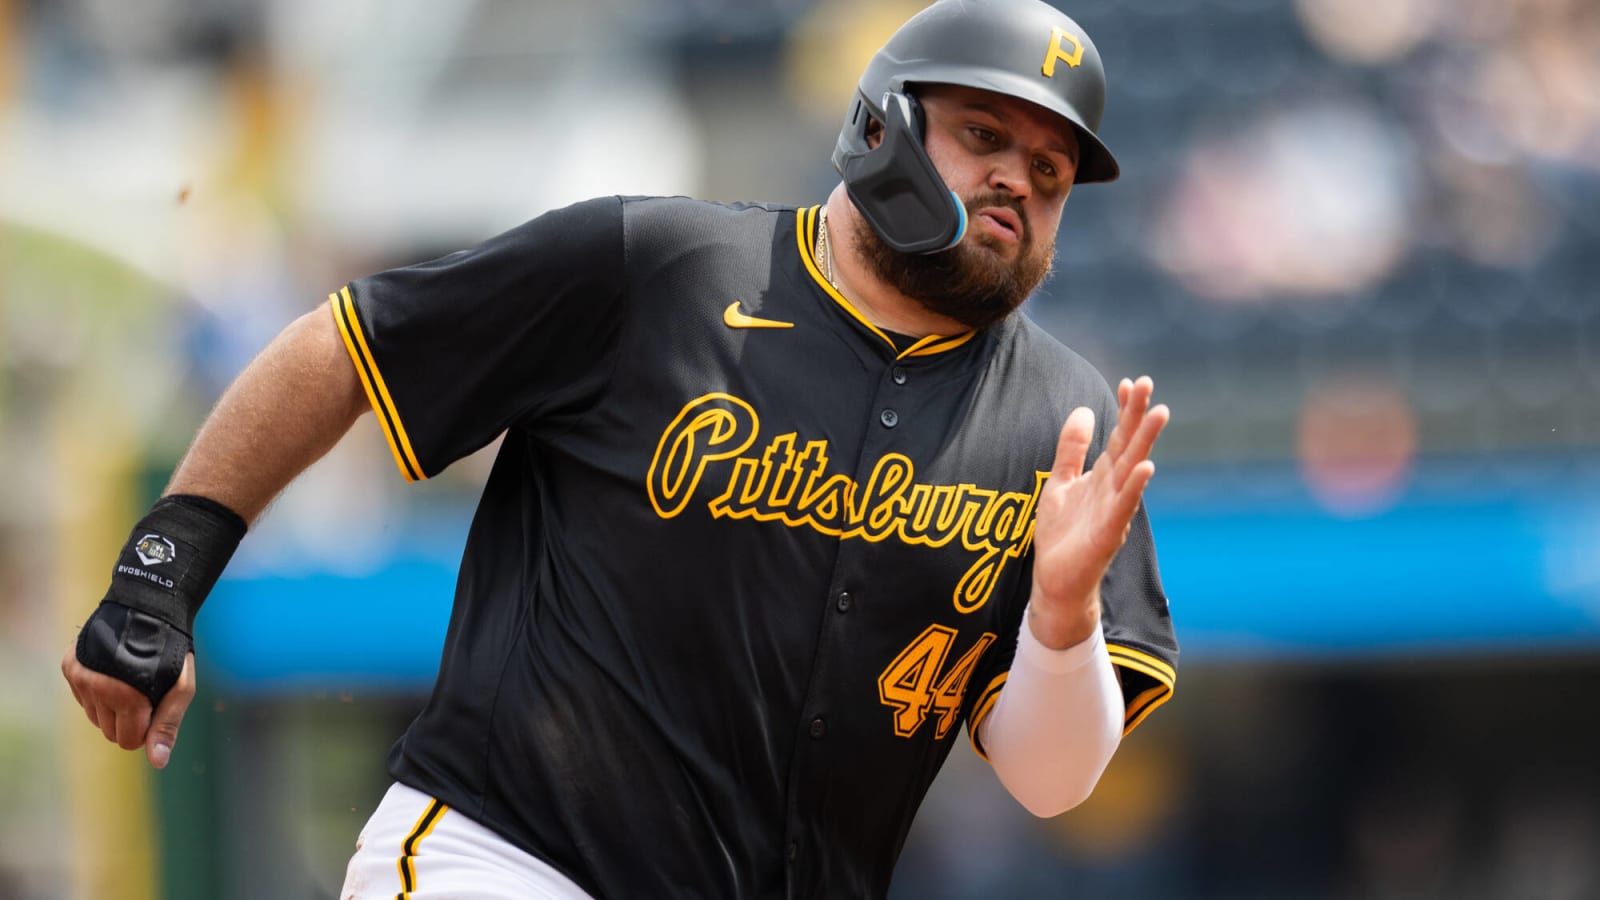 Pirates end slump against starting pitching, offense comes alive in win